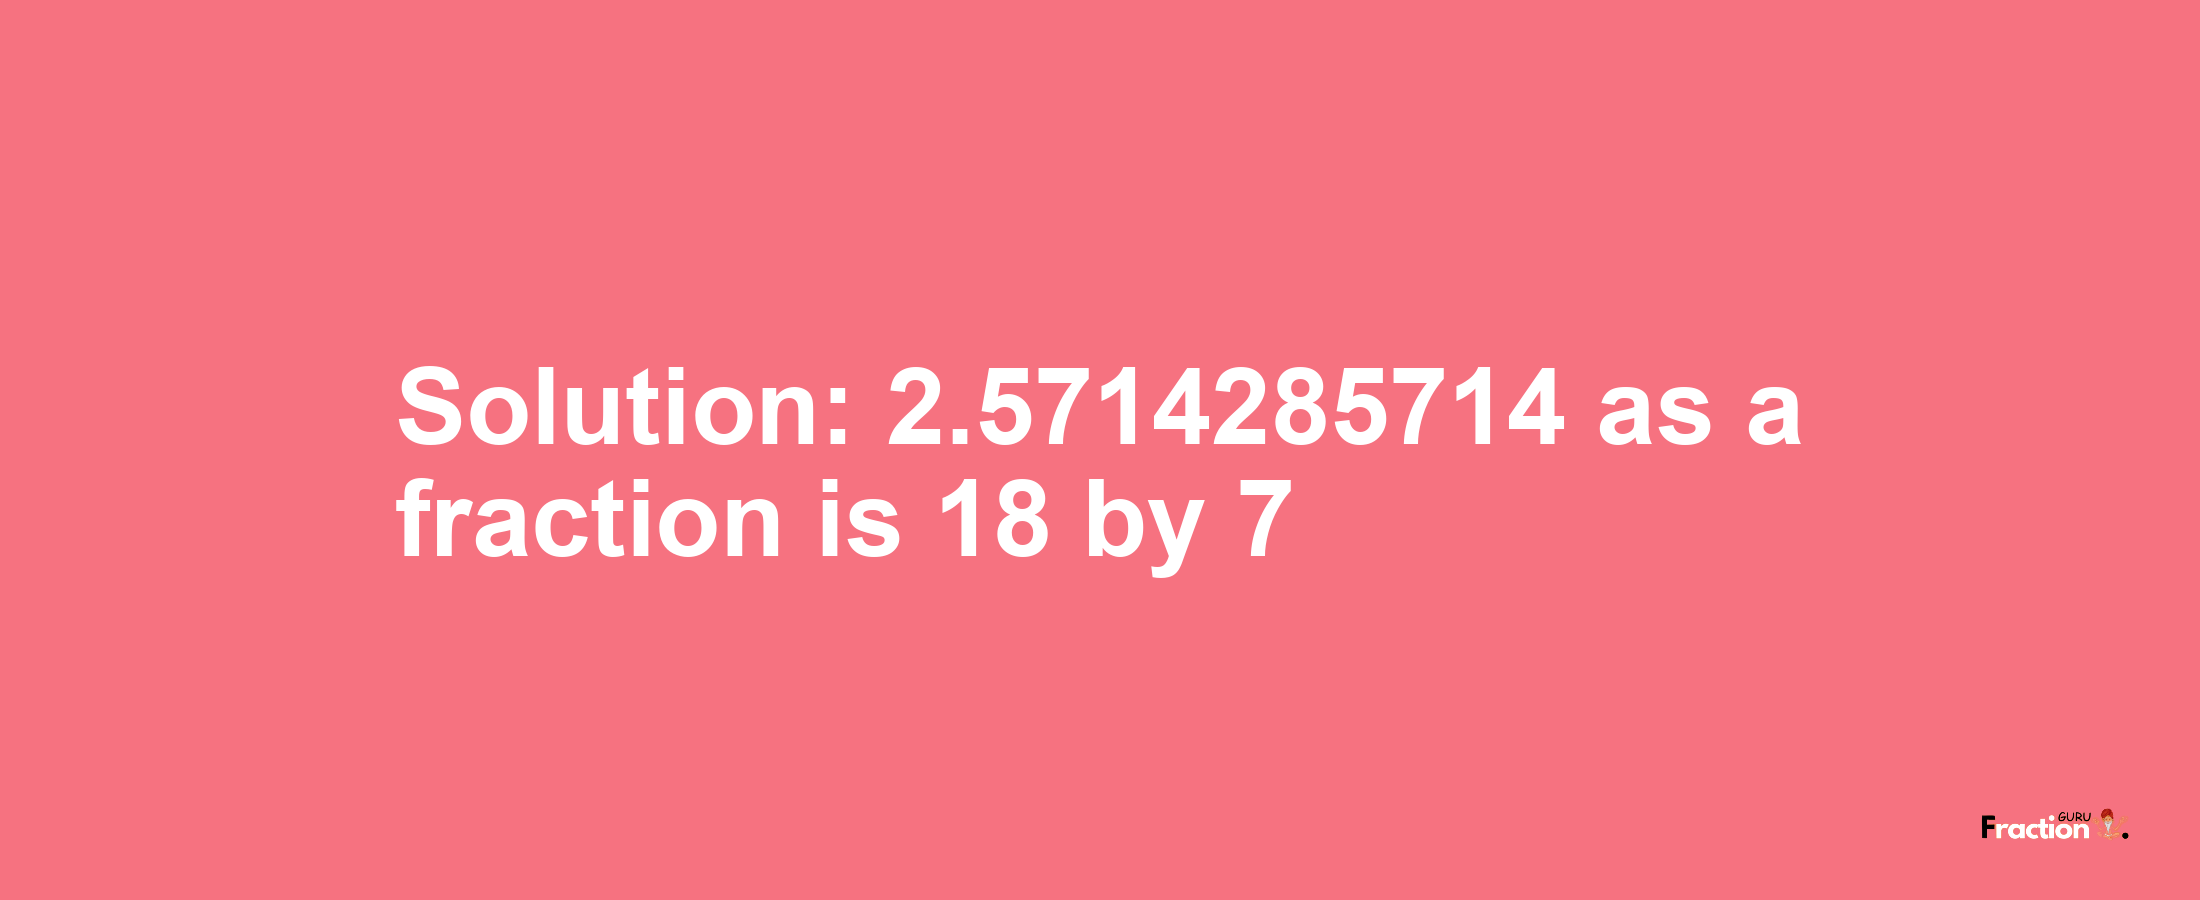 Solution:2.5714285714 as a fraction is 18/7